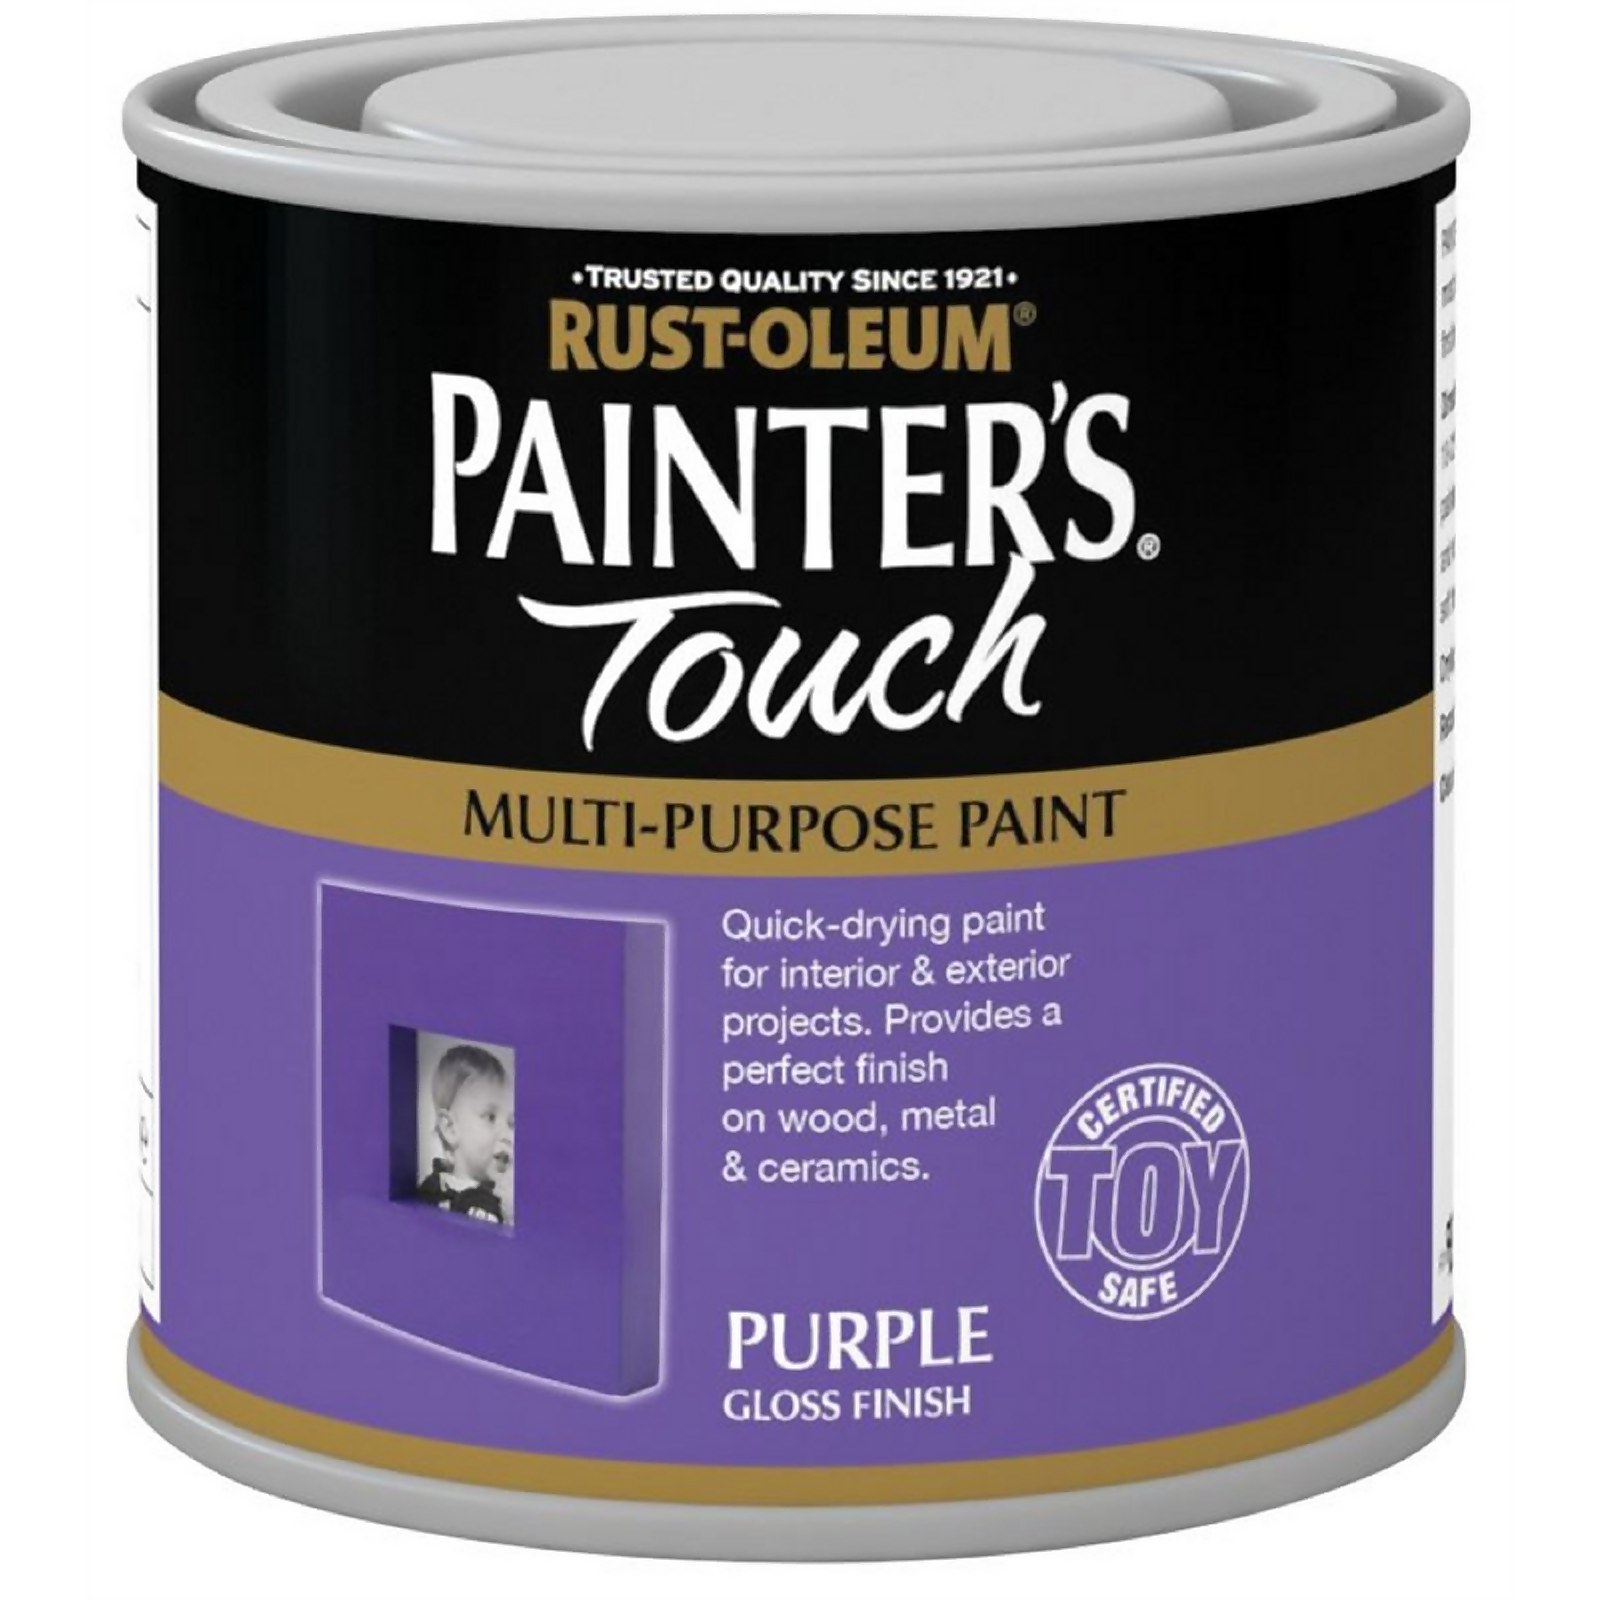 Photo of Rust-oleum Painters Touch Purple Gloss - 250ml